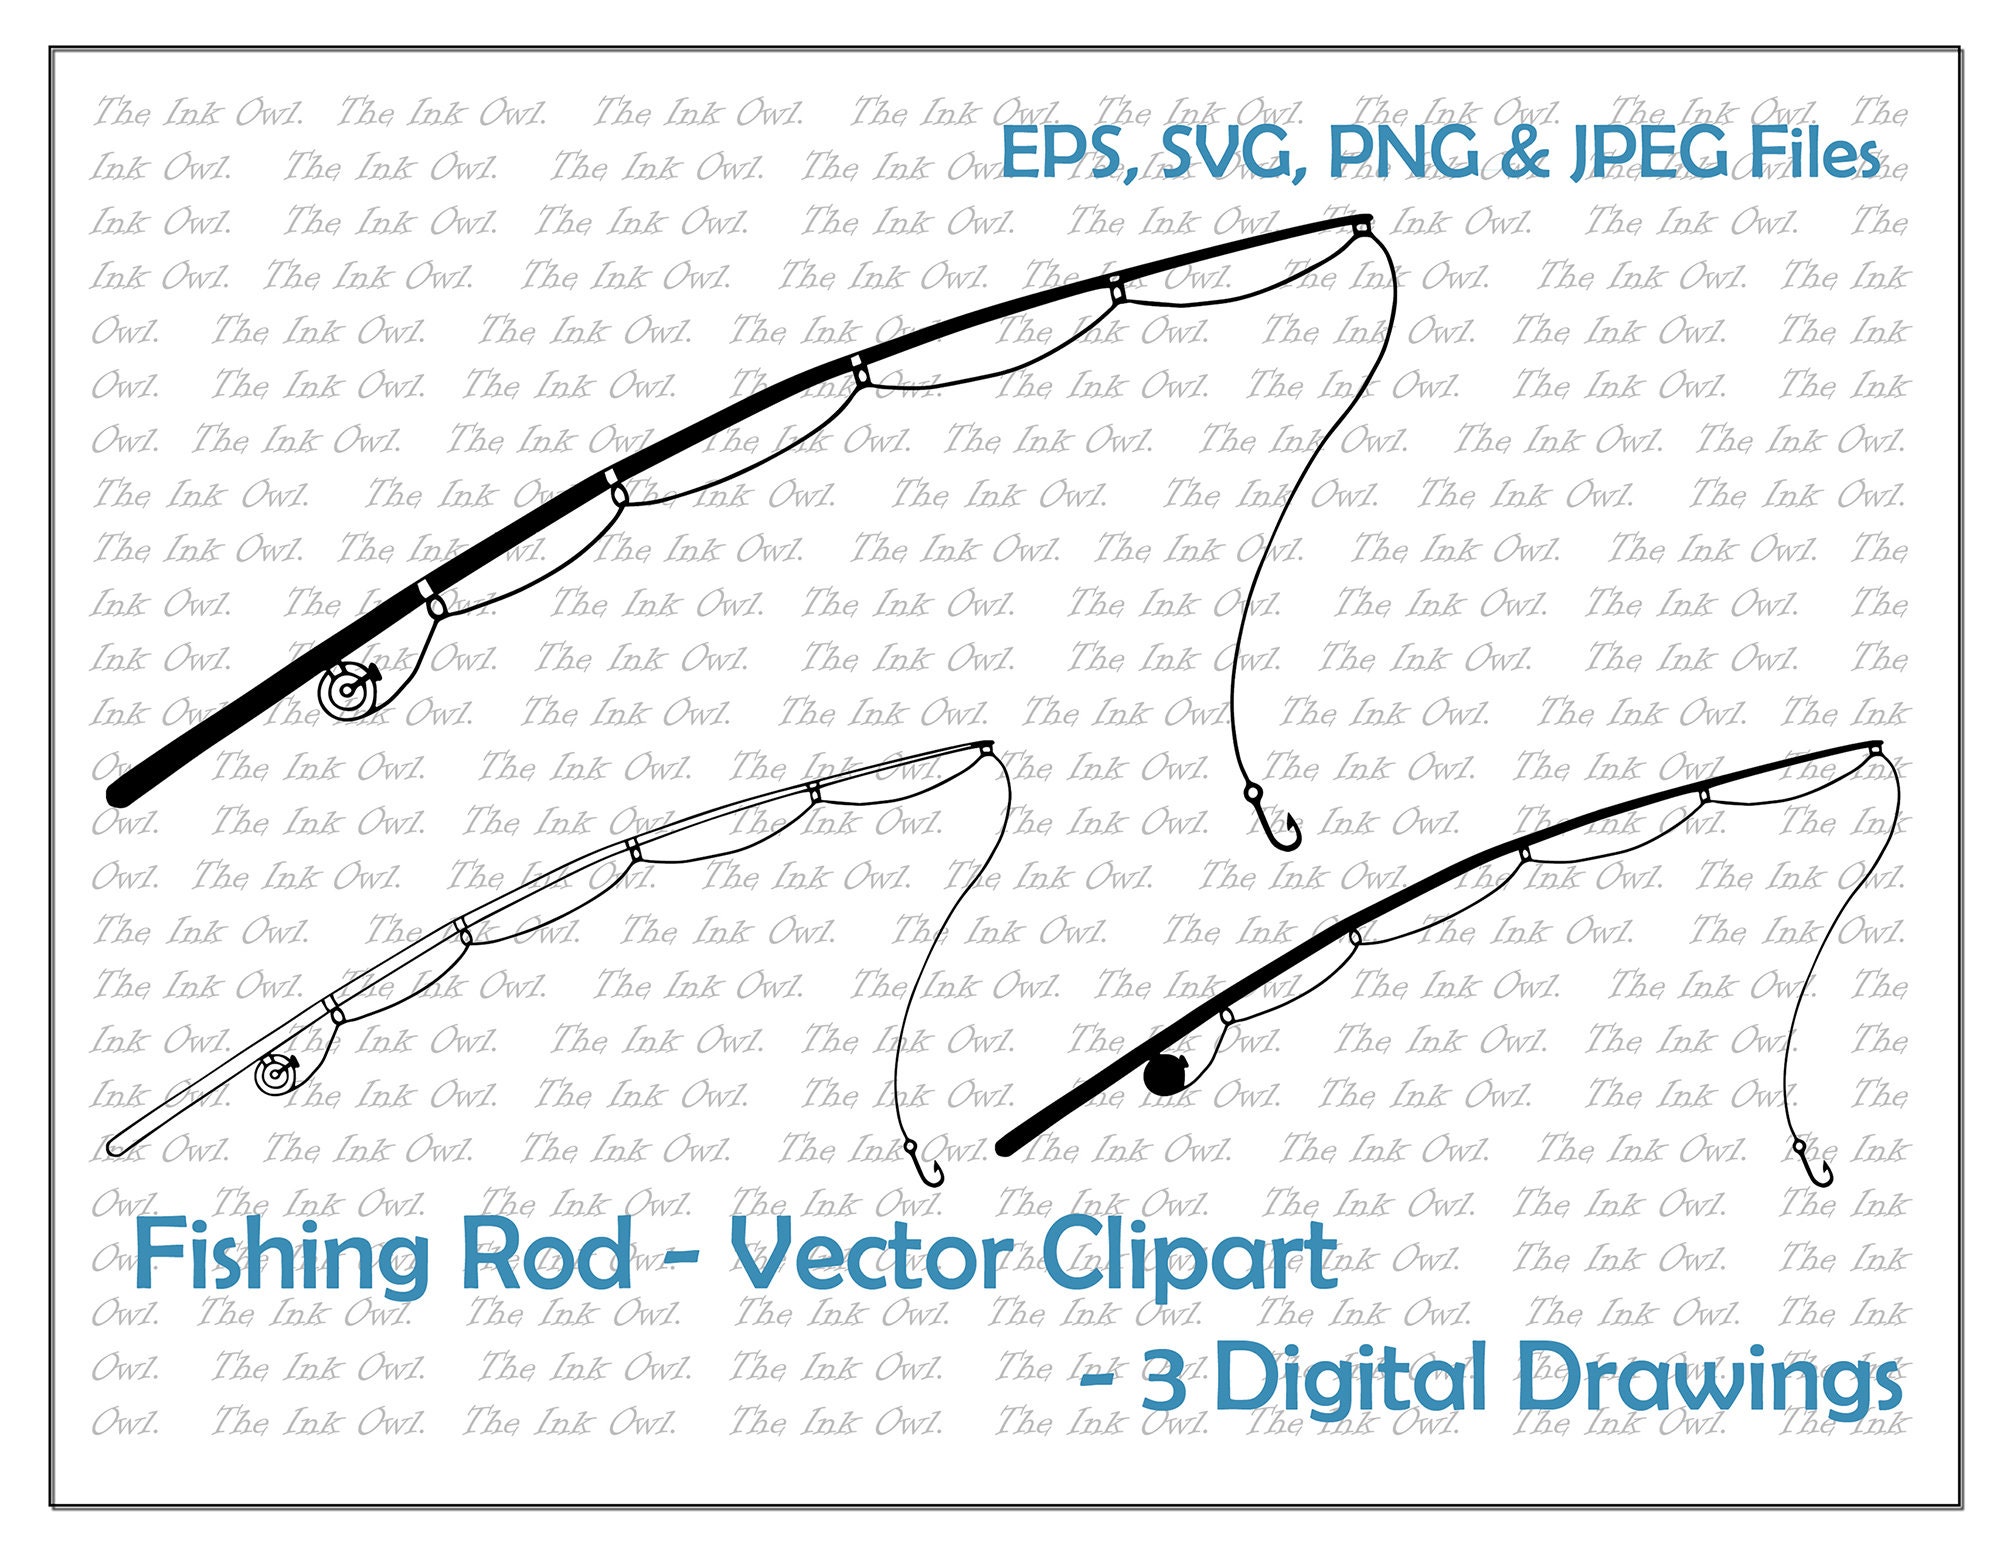 Buy Fishing Rod Pole Vector Clipart / Outline & Stamp Graphic